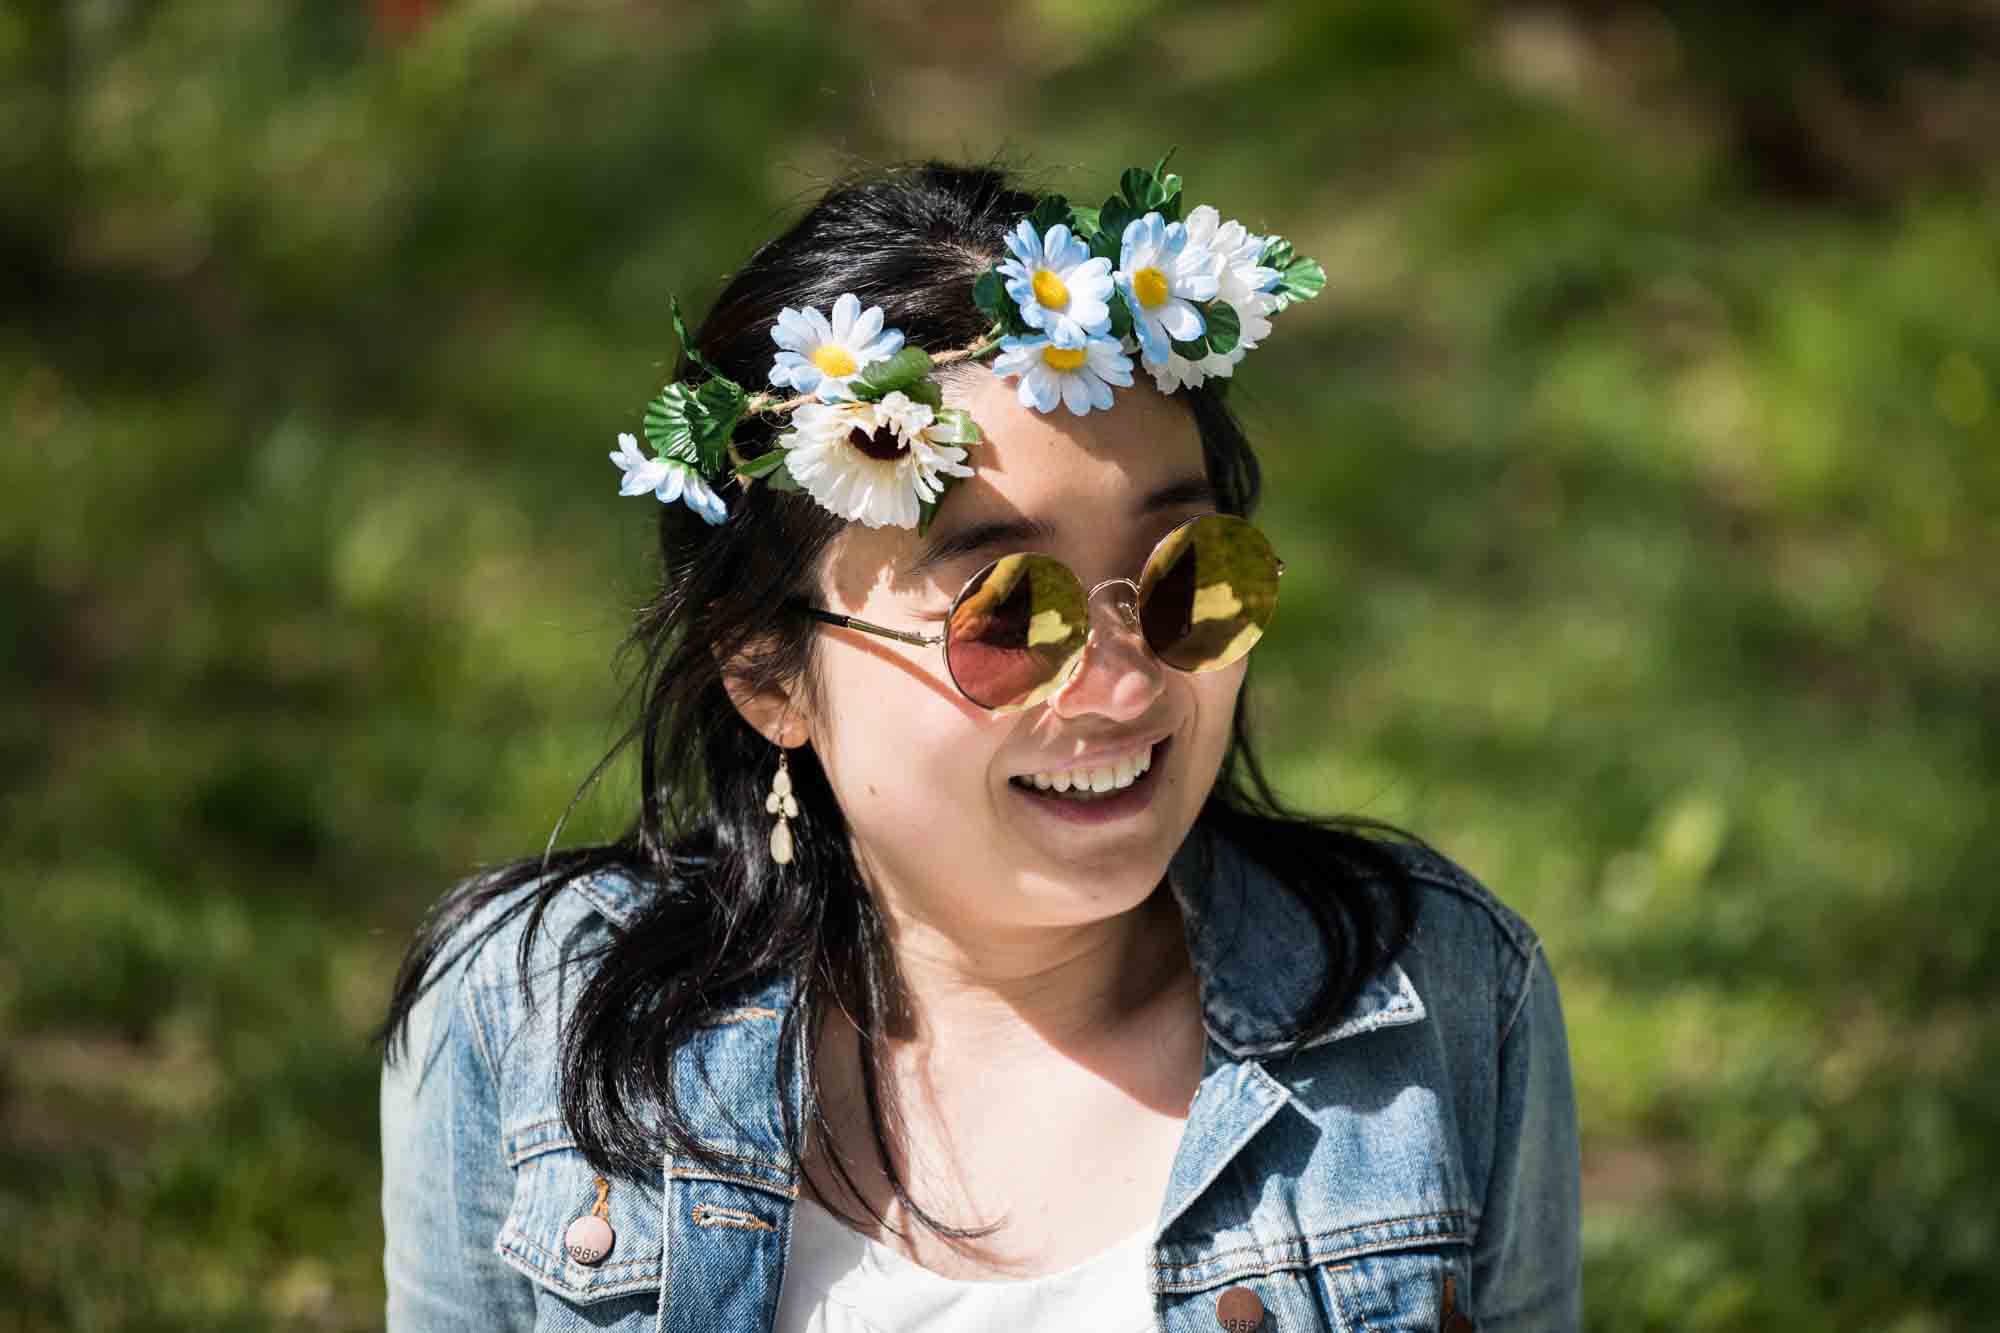 Woman wearing daisy crown and Beatles-style sunglasses